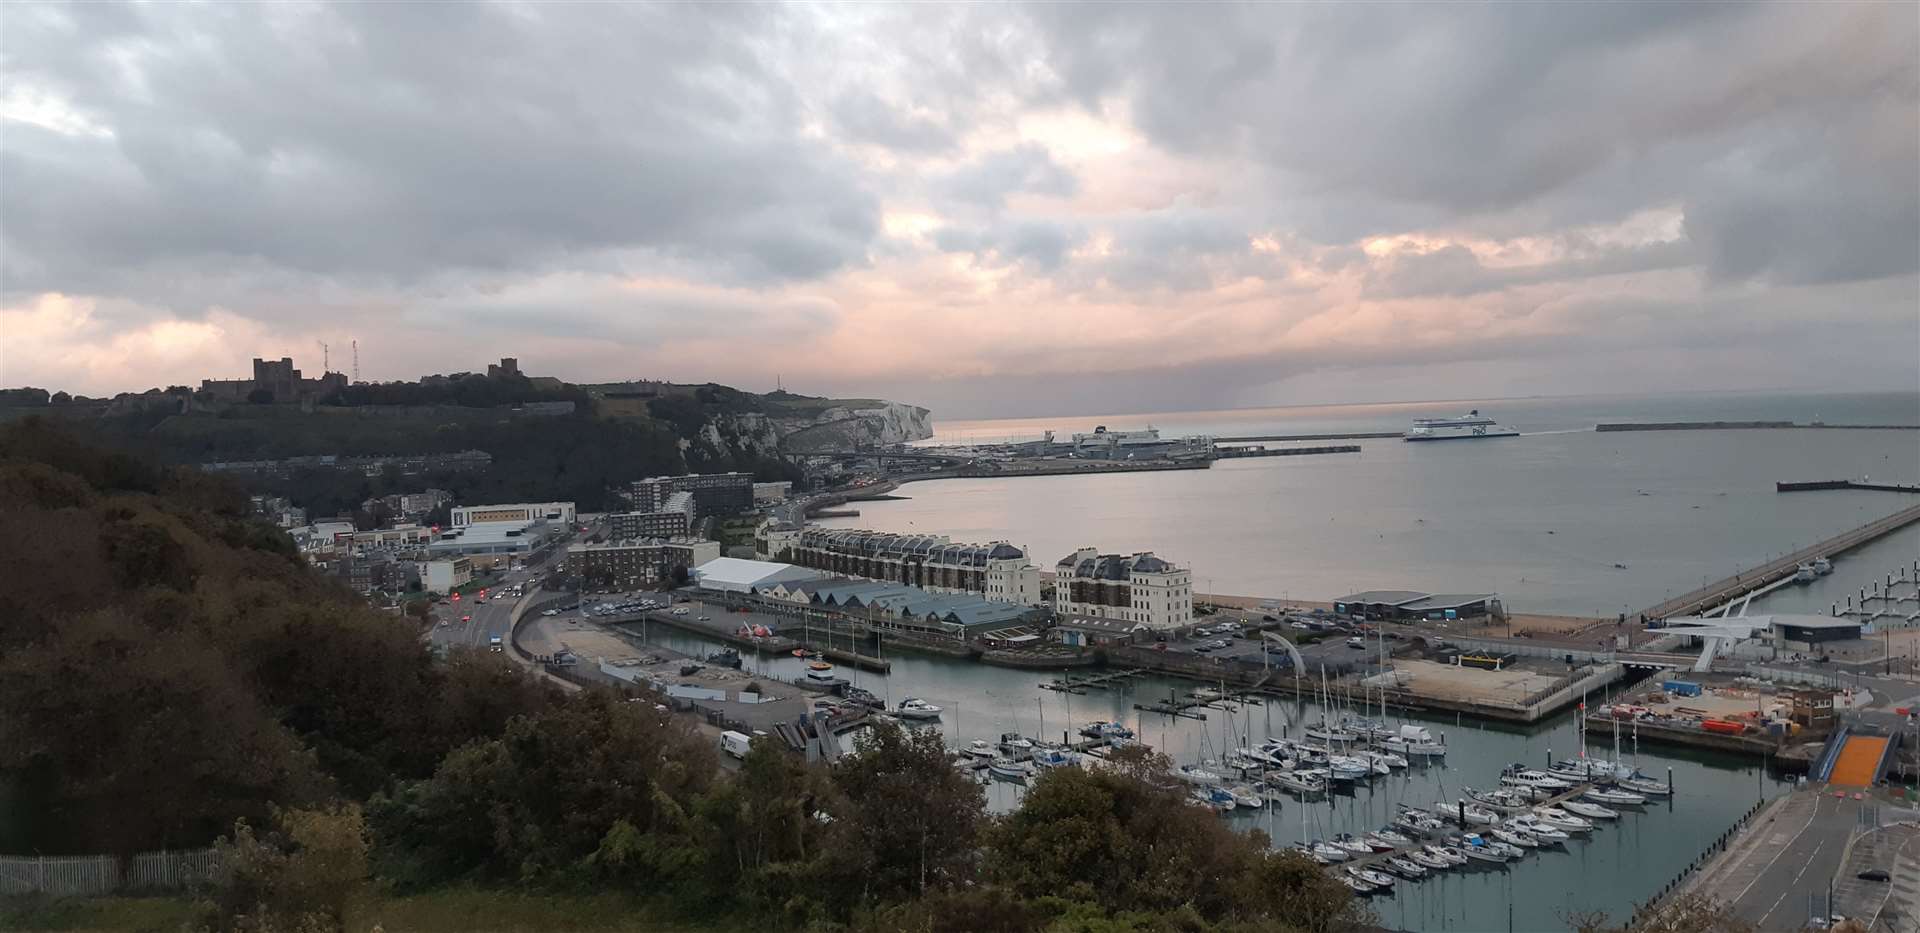 Millions of pounds from developers will help people in Dover district. Picture: Sam Lennon